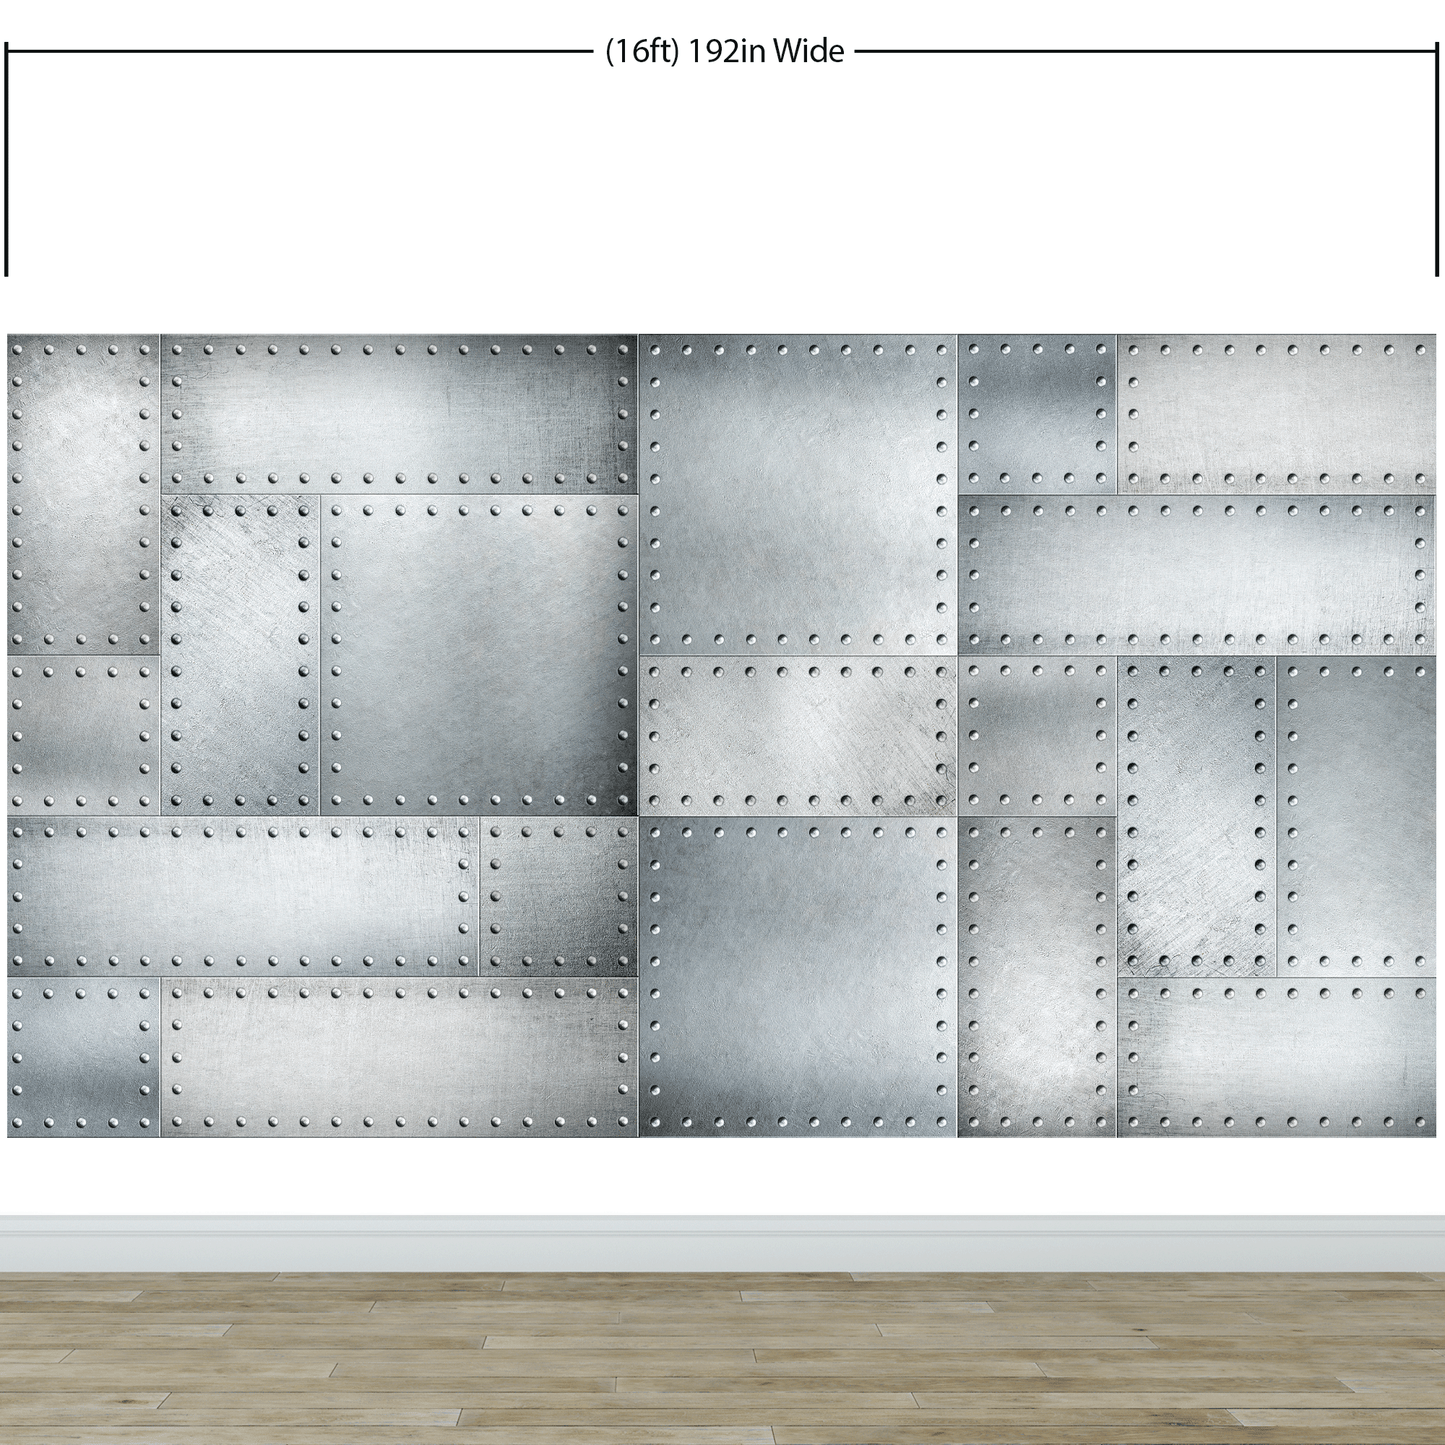 Stainless Steel Metal Grunge Design Wall Mural. Industrial Theme Peel and Stick Wallpaper. #6350